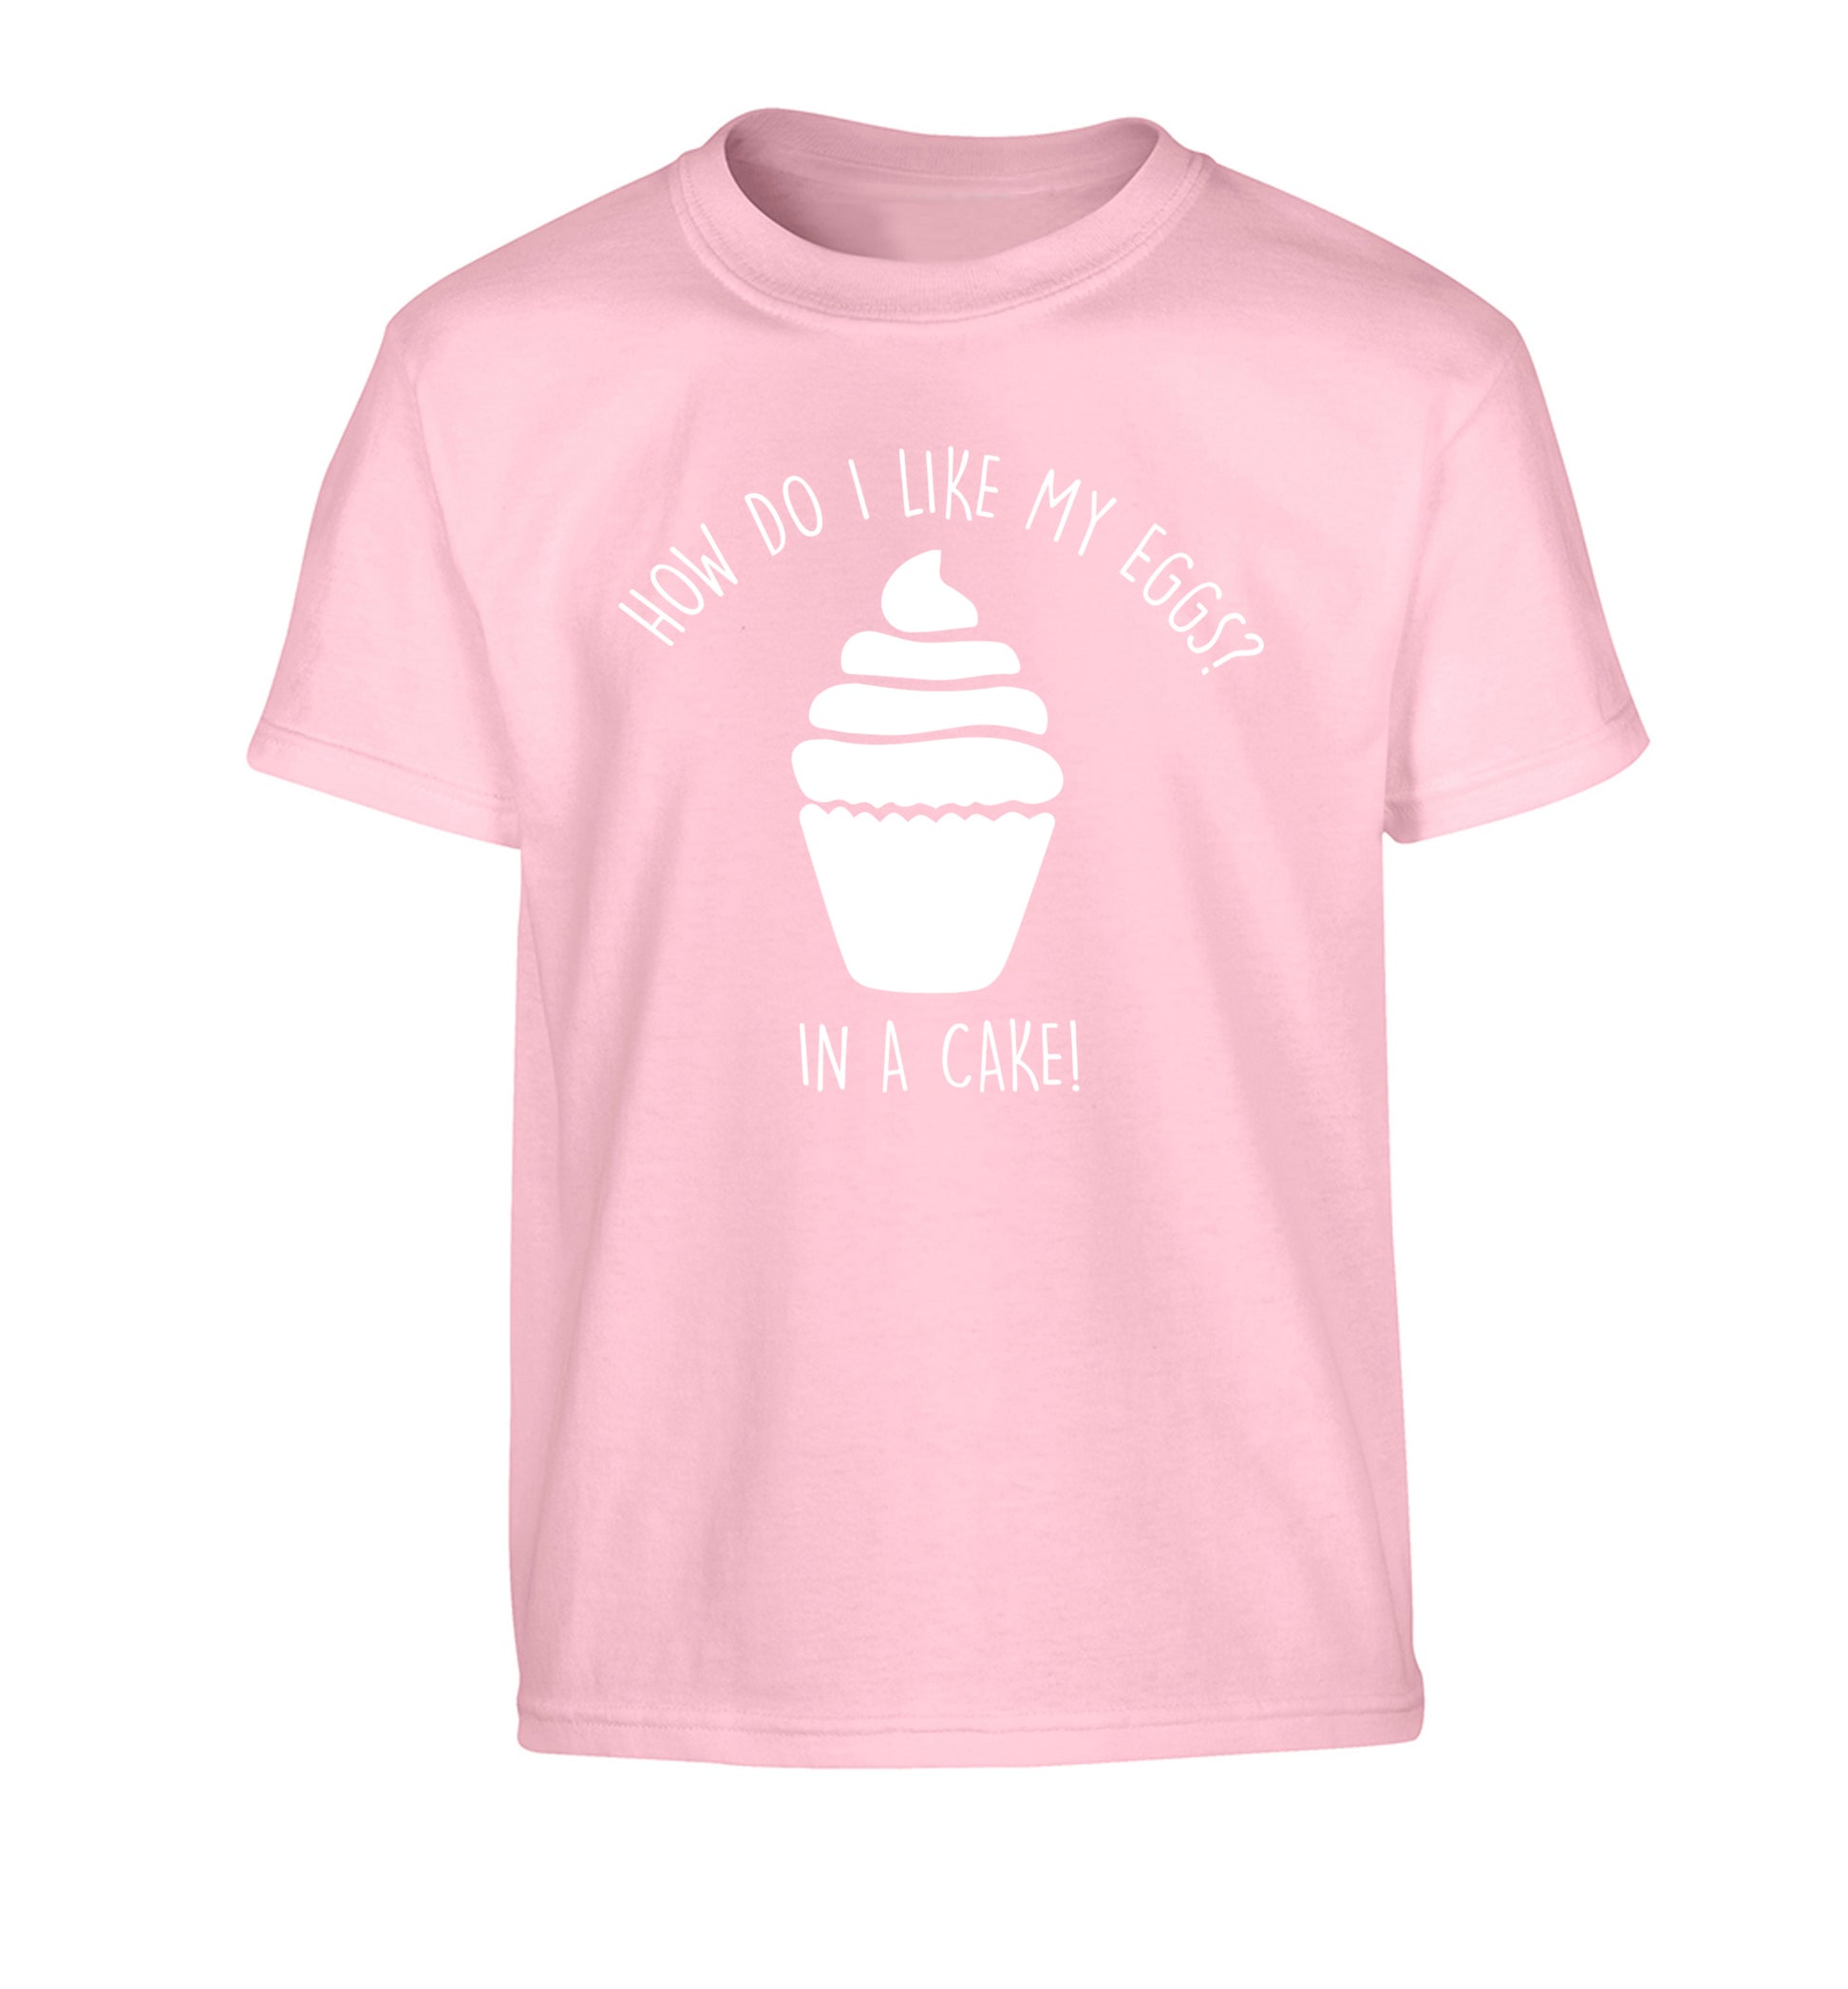 How do I like my eggs? In a cake! Children's light pink Tshirt 12-14 Years